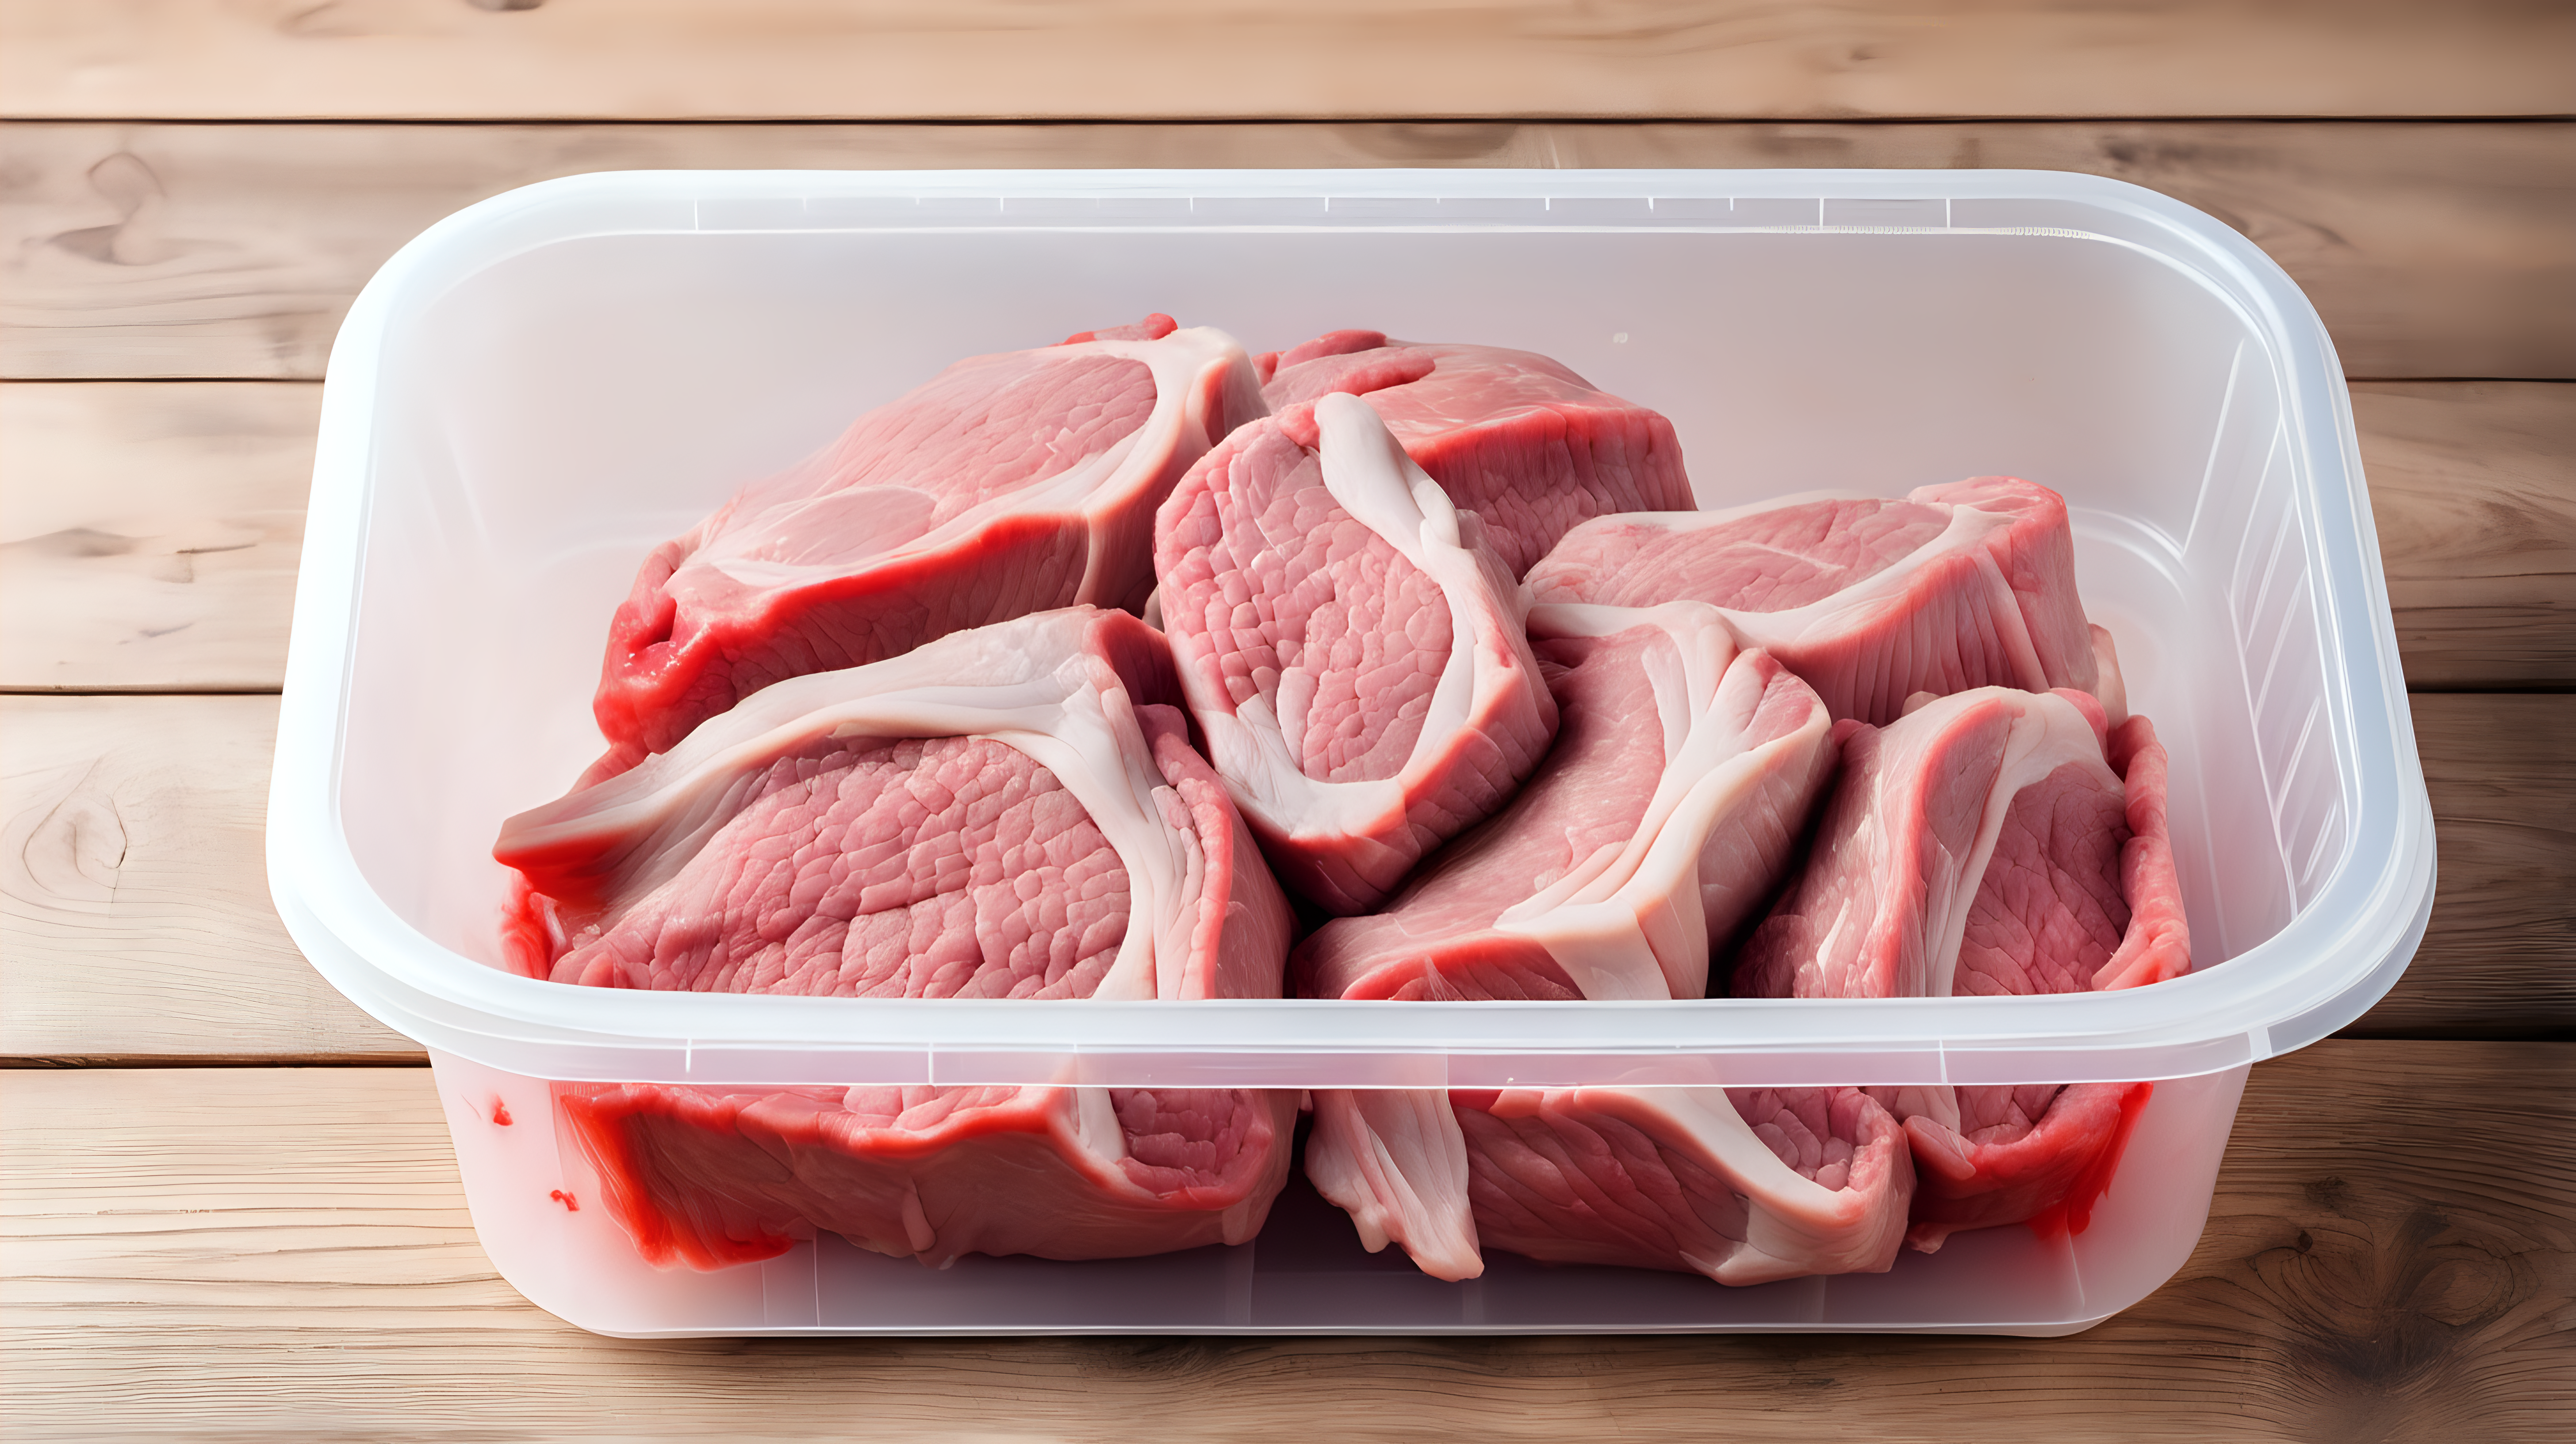 lamb meat in plastic container on wooden table, isolated on white background